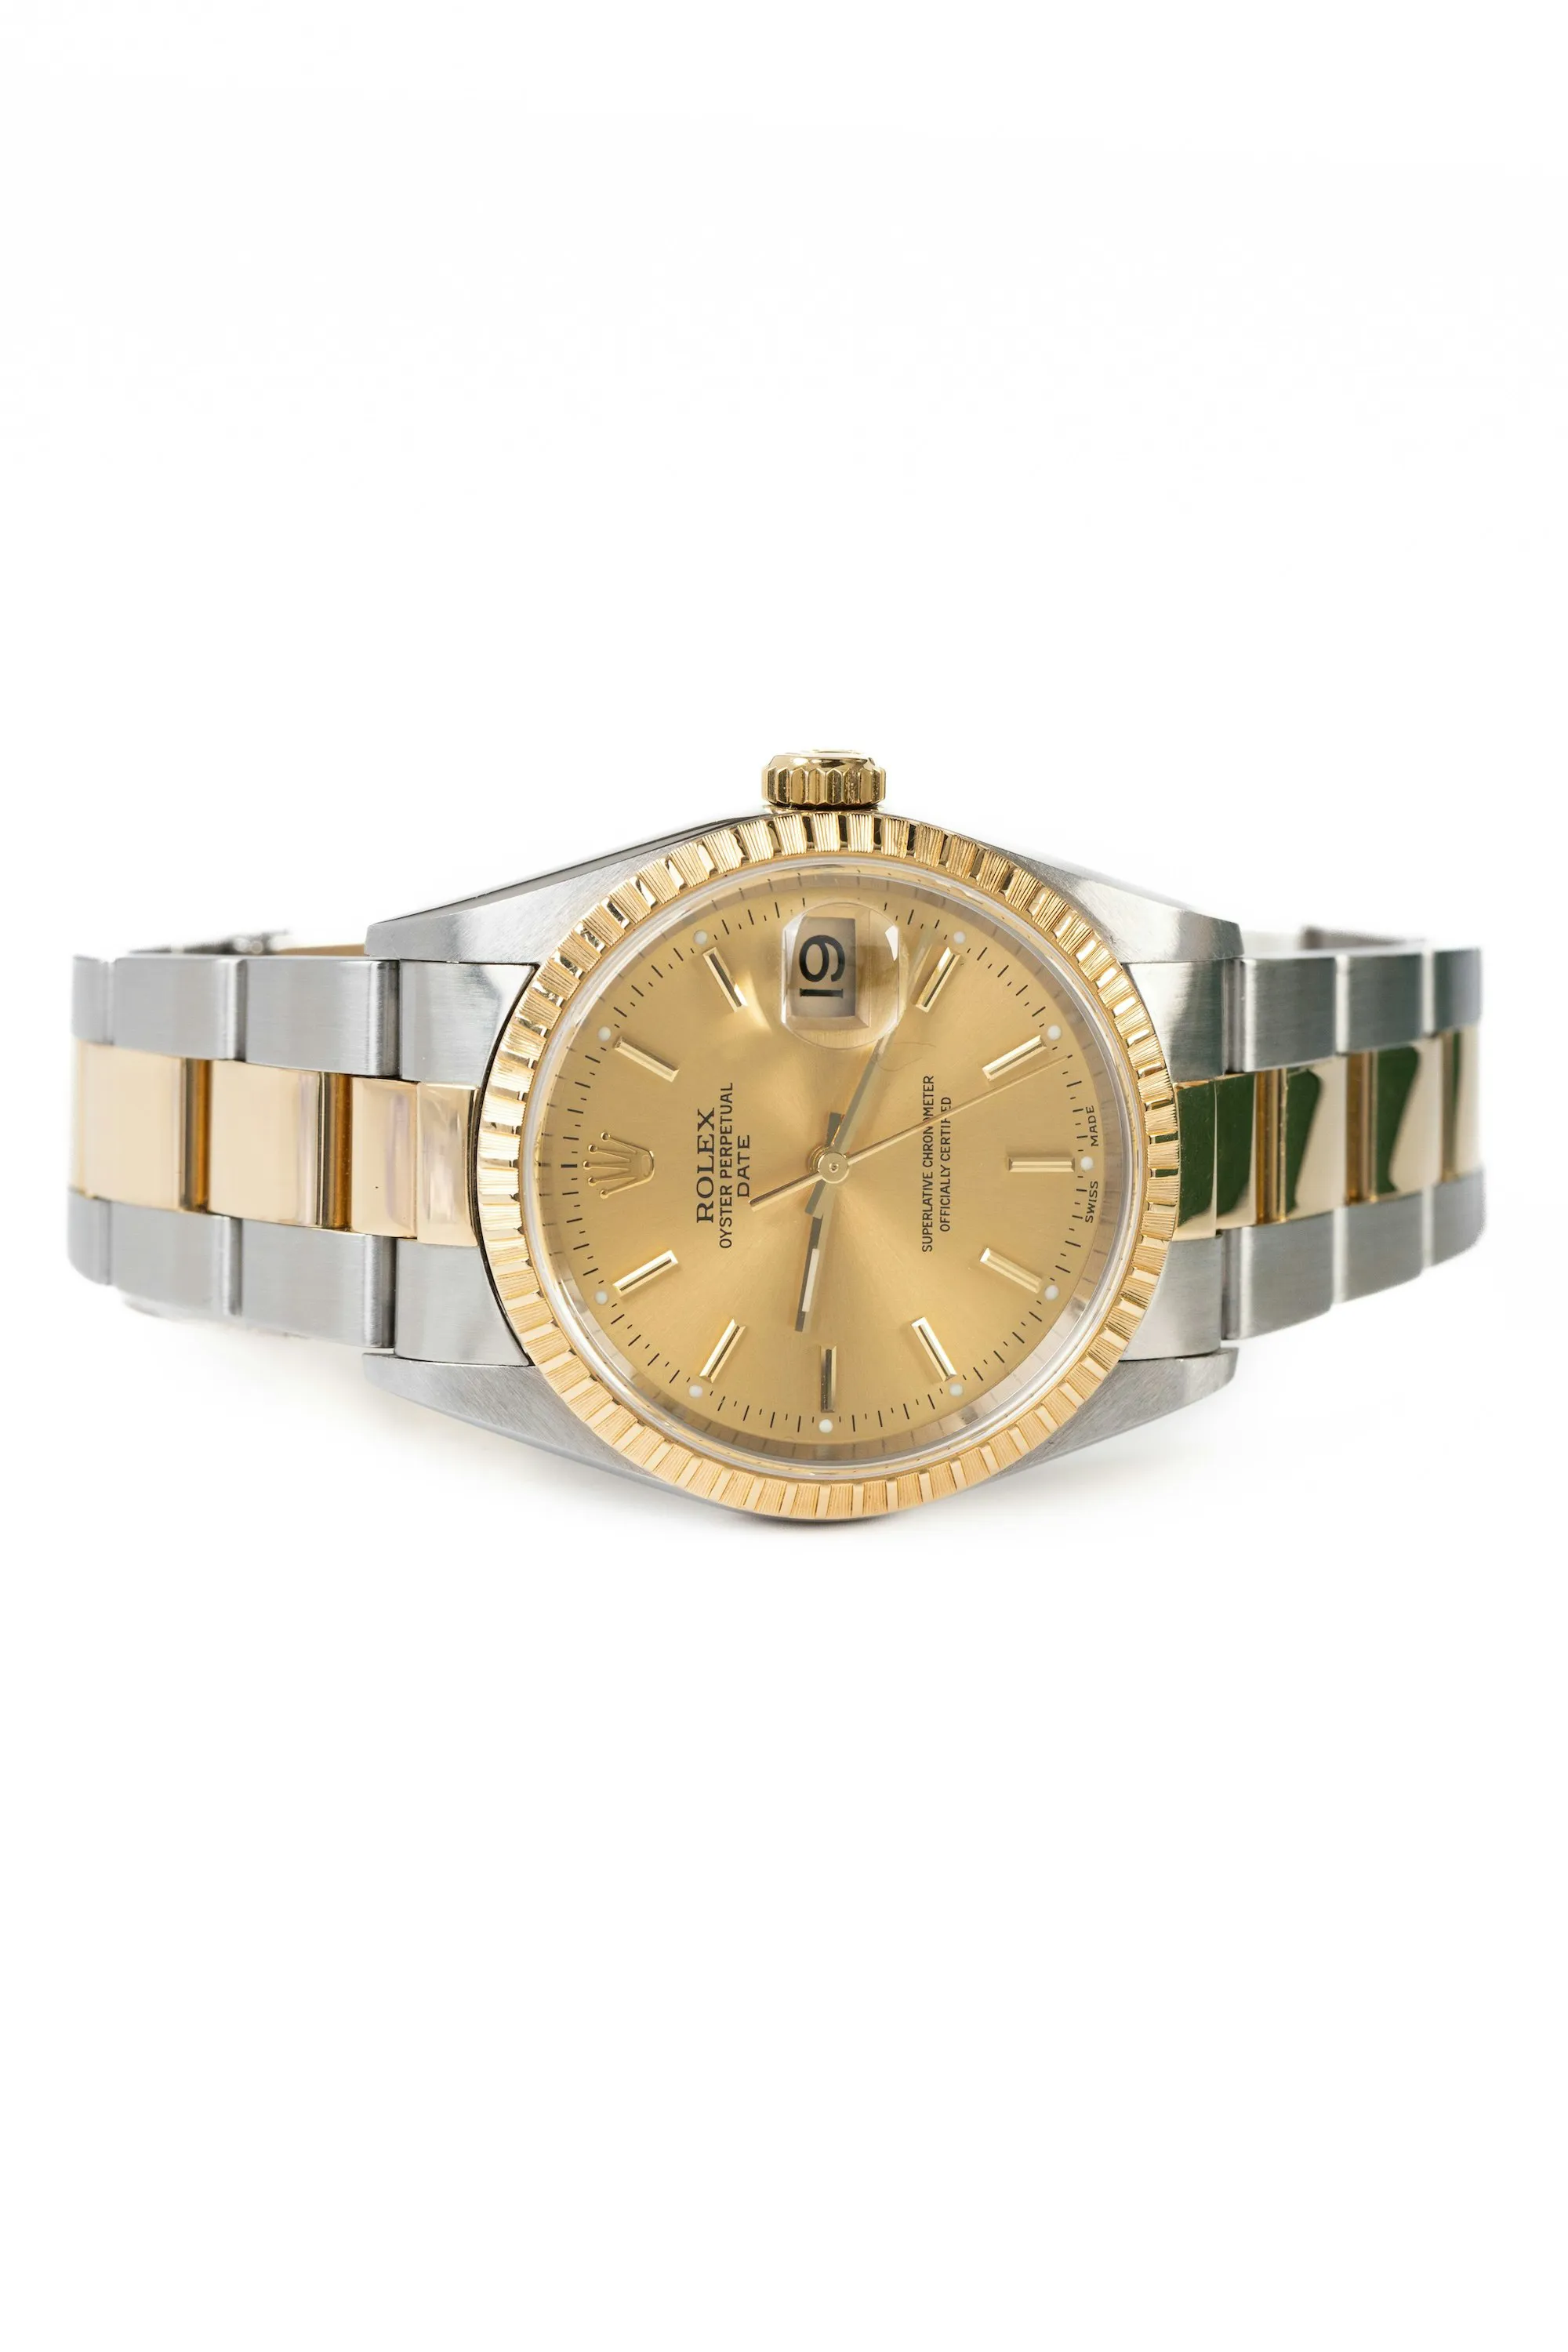 Rolex Oyster Perpetual Date 15223 nullmm